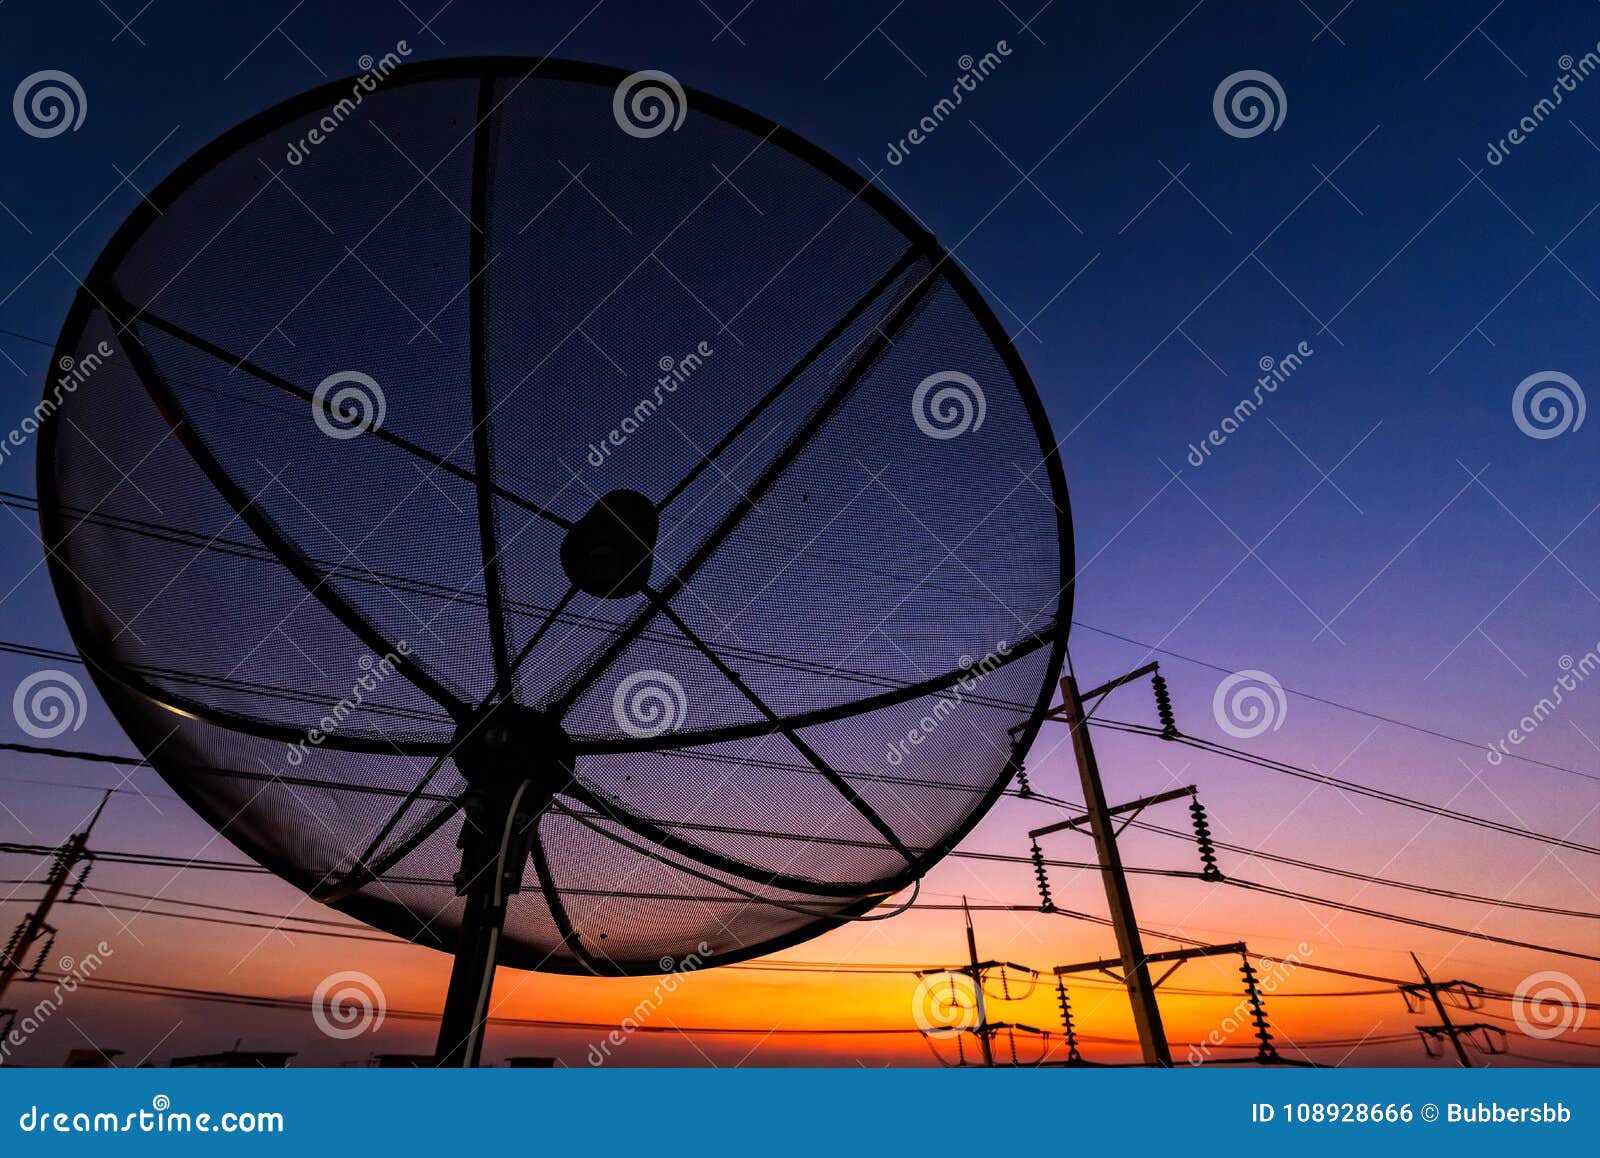 Technologies used for the satellite communication